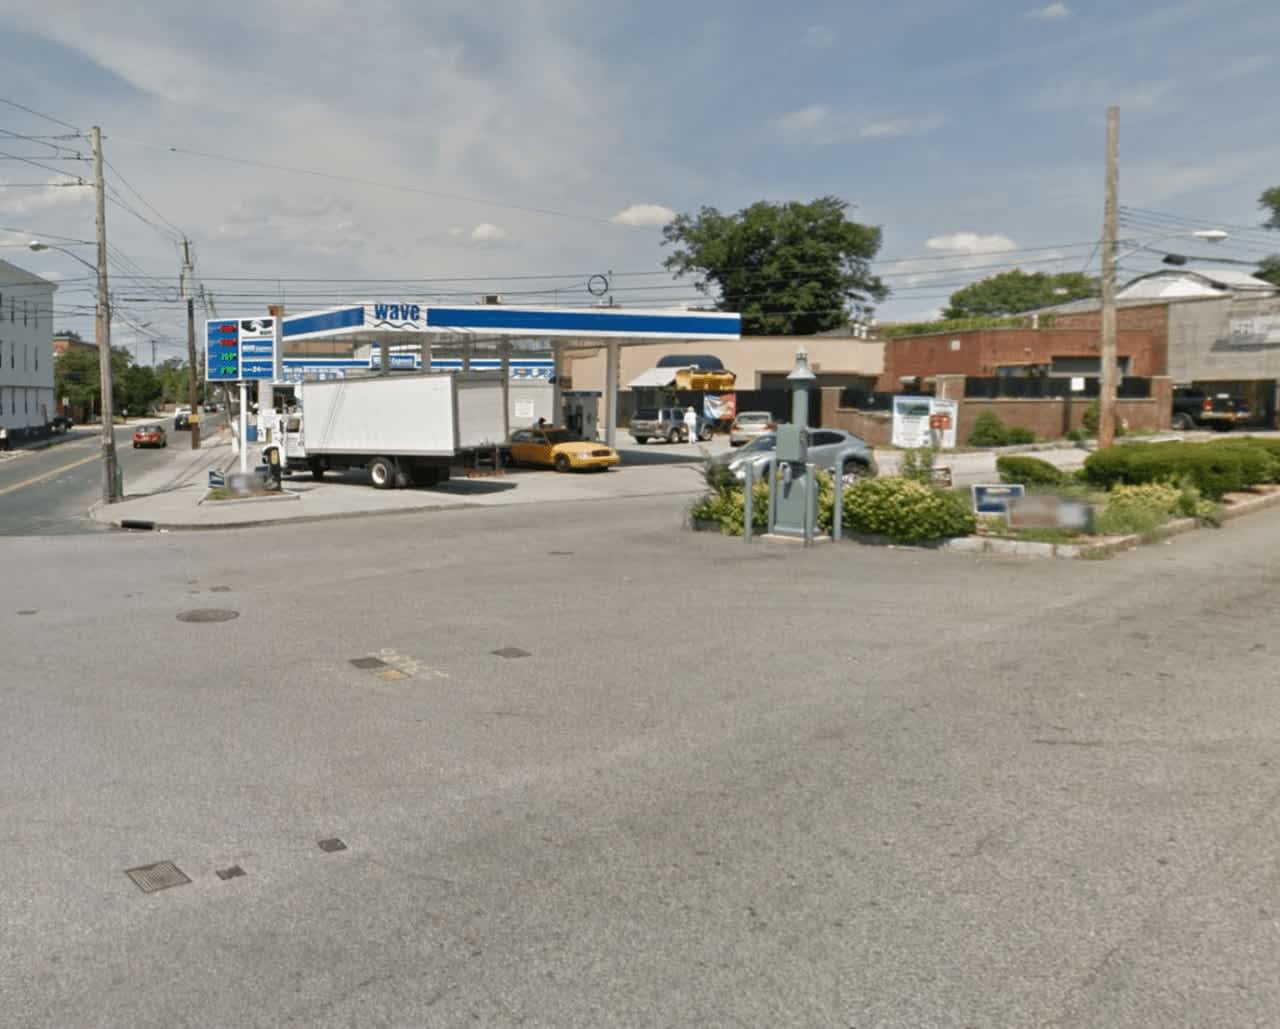 A winning TAKE5 lottery ticket was sold at this Mount Vernon gas station.